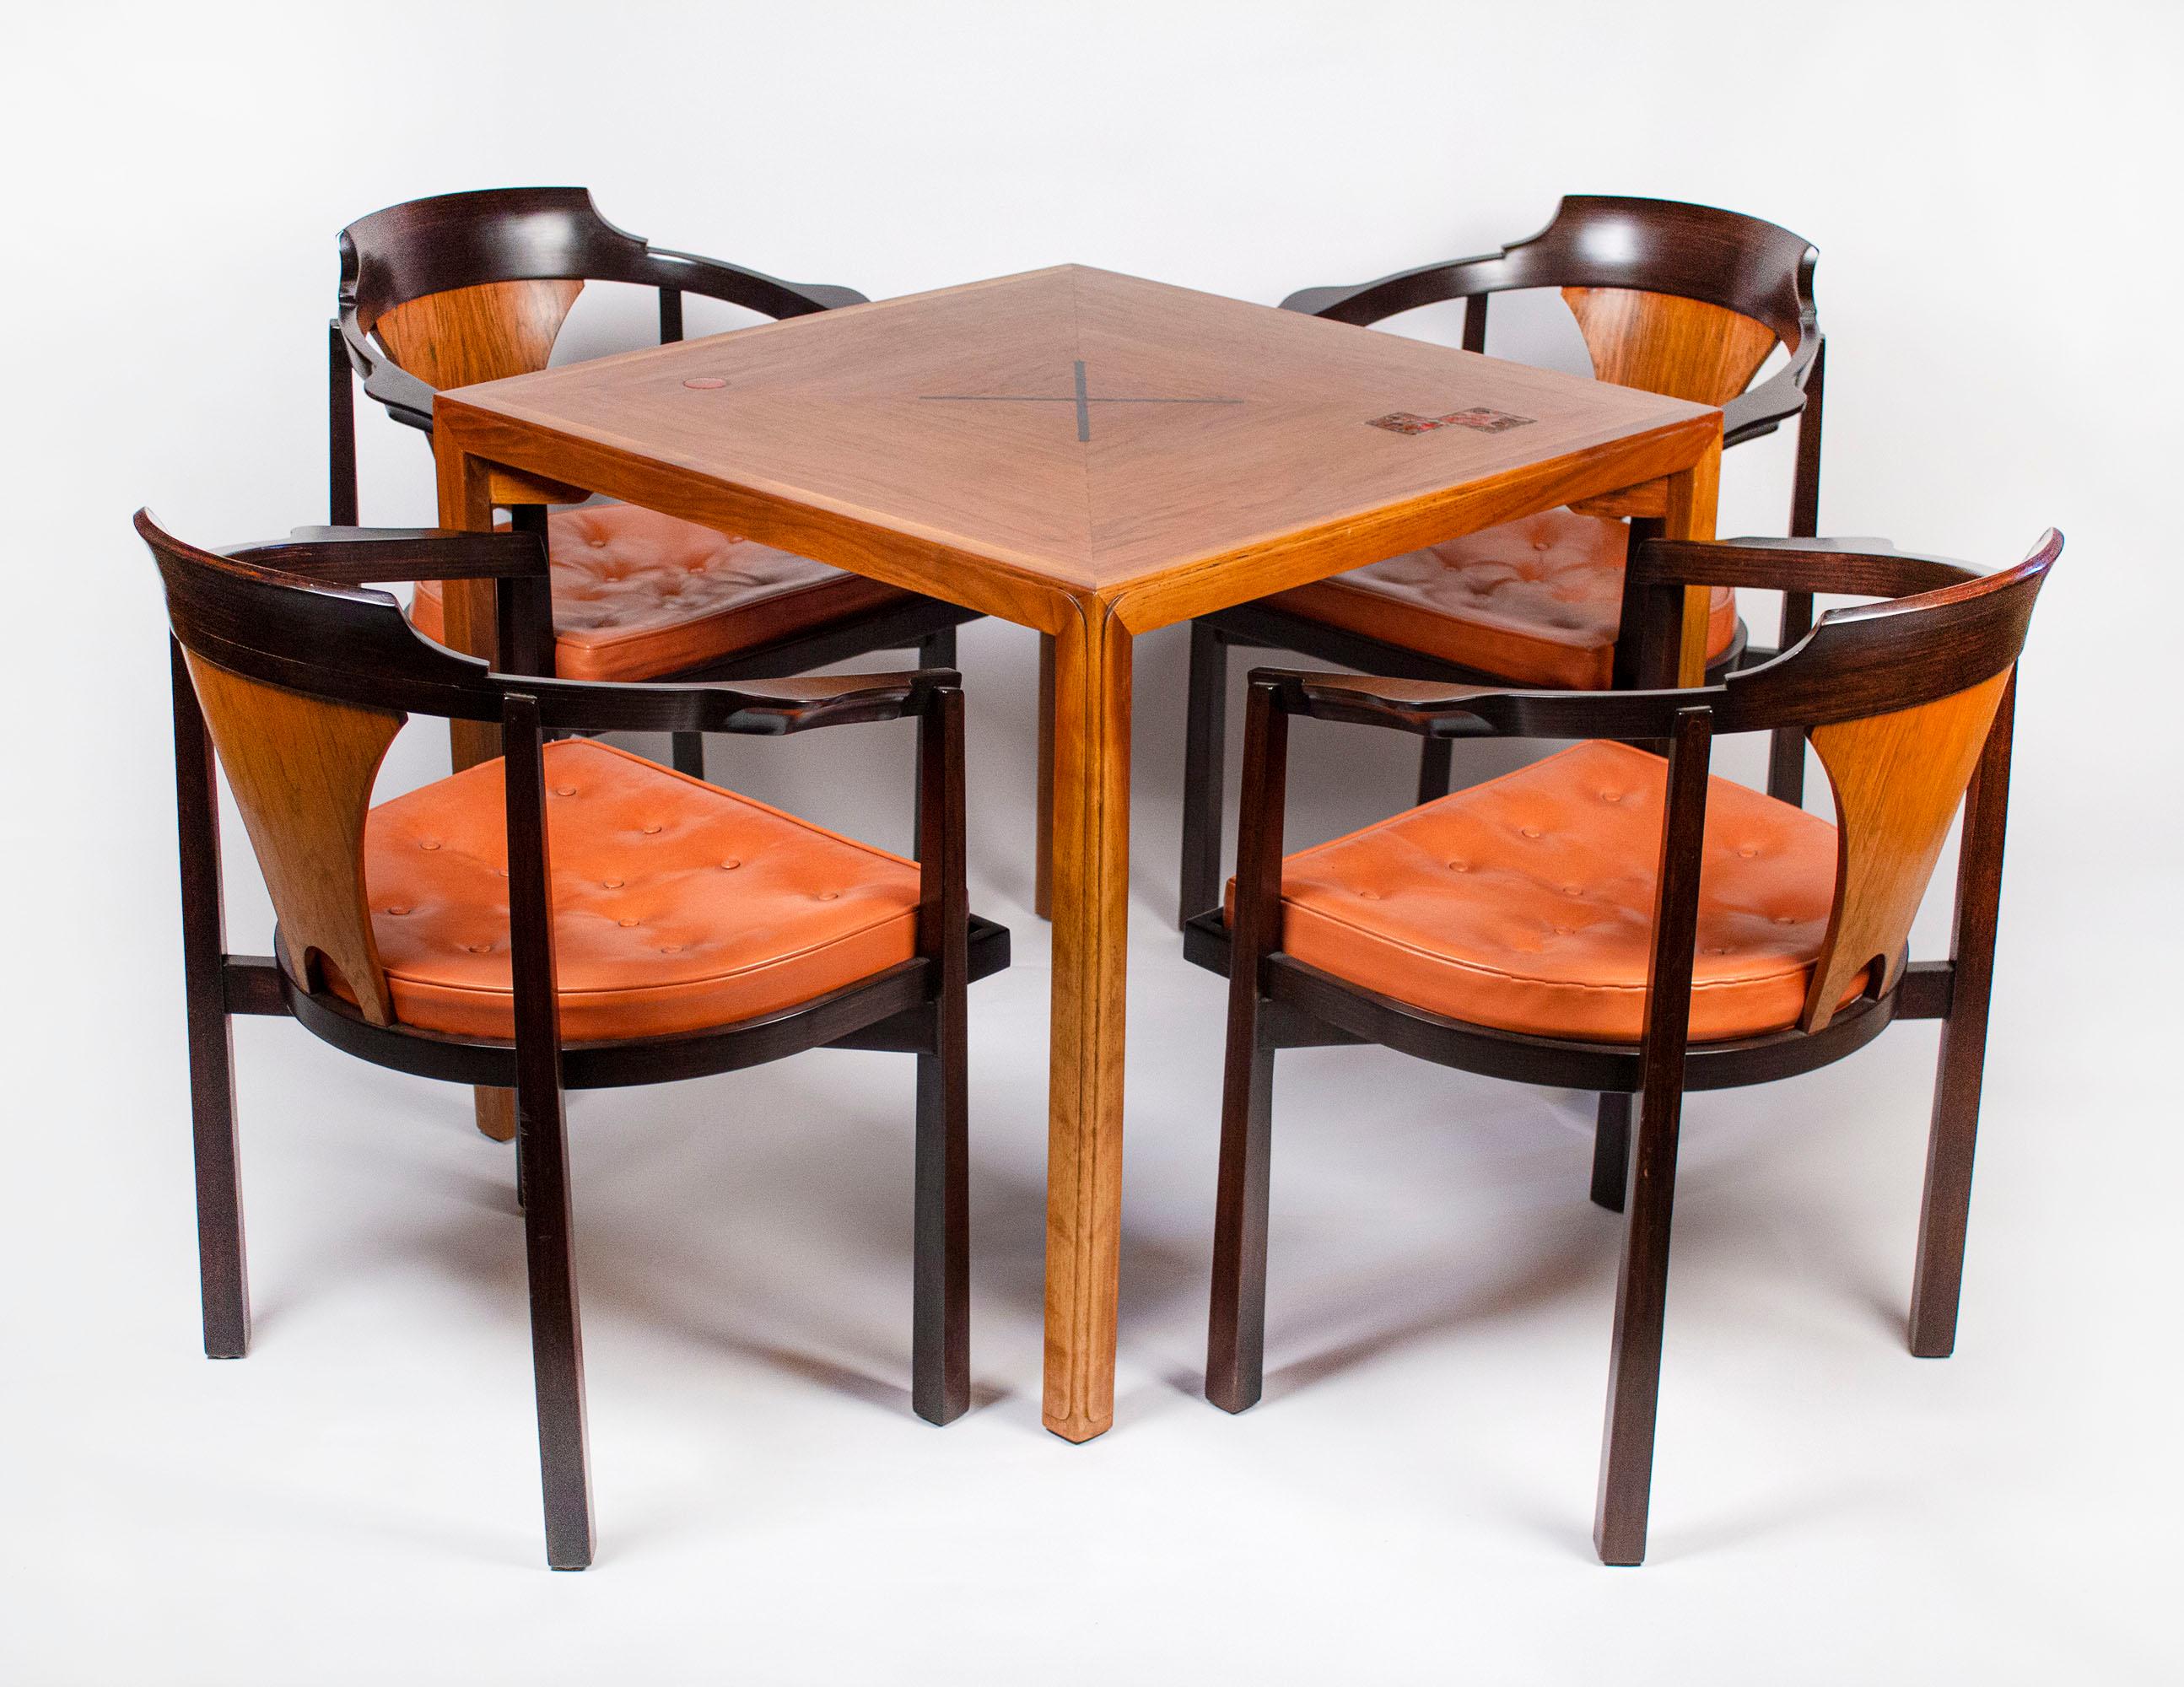 Occasional table & chairs designed by Edward Wormley for Dunbar with tiles by Gertrud & Otto Natzler. This set is in excellent original condition with the model #935 chairs crafted in rosewood & walnut with the original coordinating leather